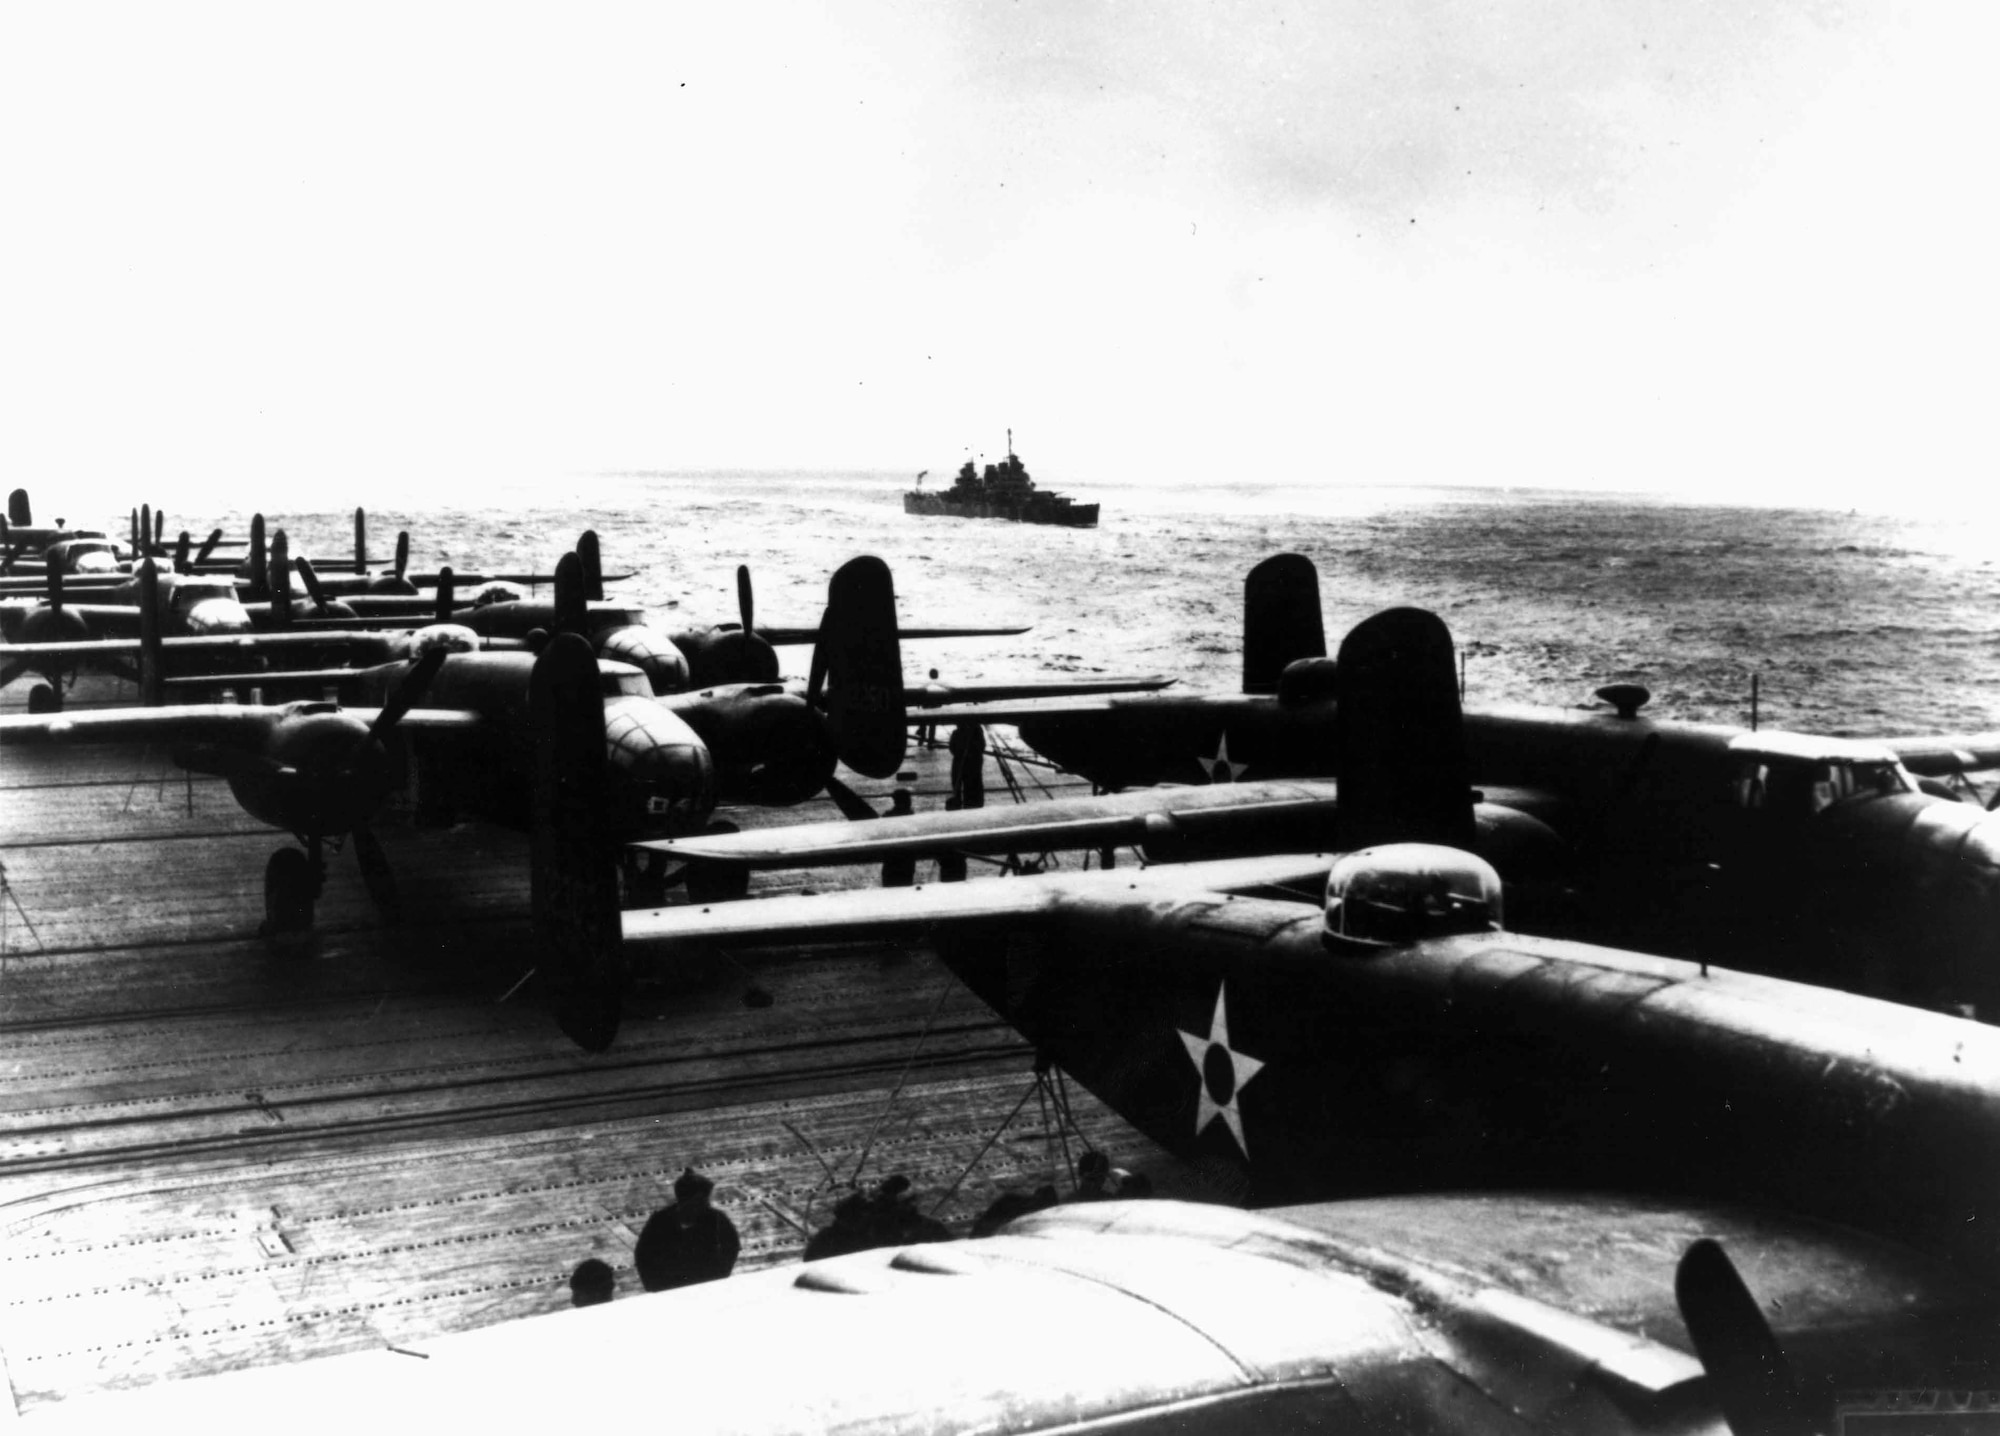 B-25 Mitchell bombers are tethered to the deck of the USS Hornet for their long trek from Calif. to Tokyo.  The bombers were modified to make them as light as possible and the tail guns were replaced with black painted broom handles to deter enemy fighters but to decrease take-off weight.  Later, newly promoted Brig. Gen James Doolittle, who led the raid, said the broom handles were surprisingly effective at deterring Japanese fighters. (Photo courtesy of 28th Bomb Wing historian’s office)